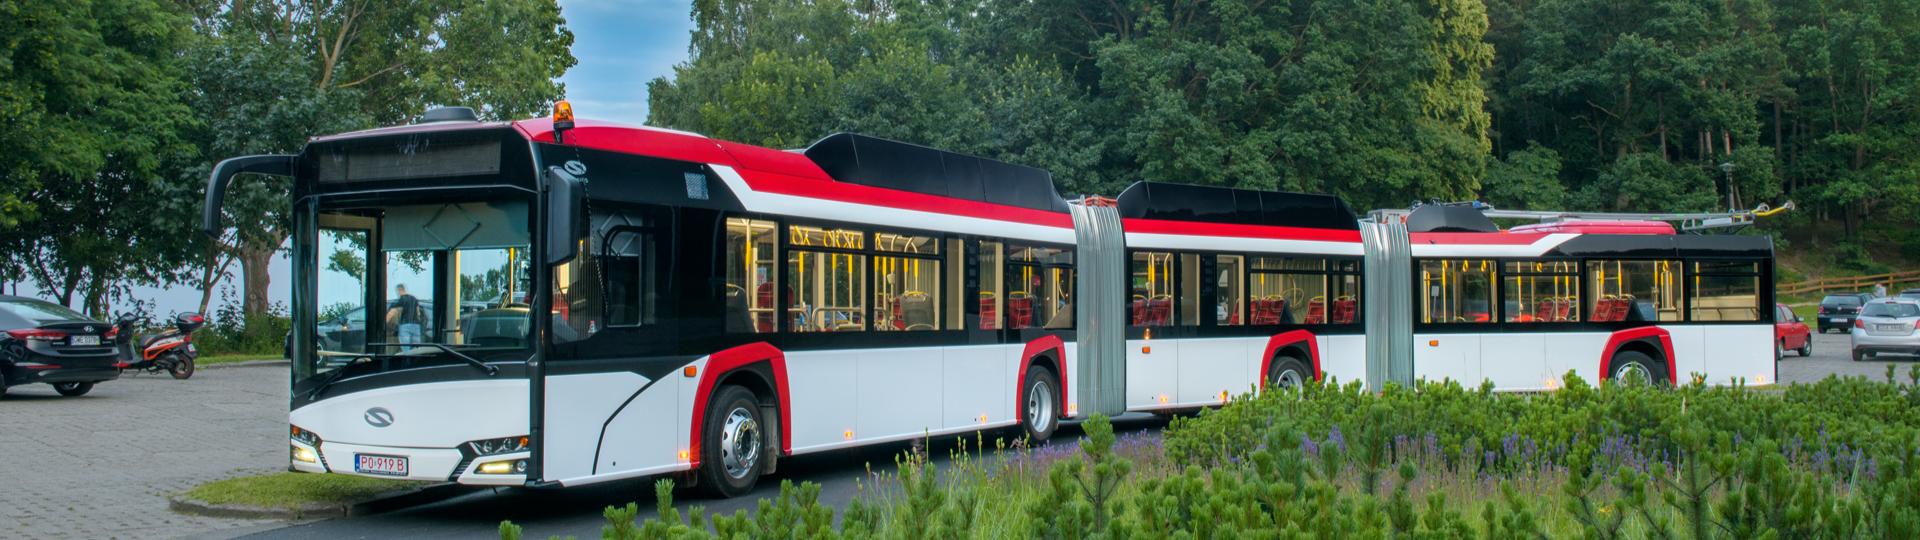 16 Solaris Trollino 24 vehicles may be delivered to the Slovak capital